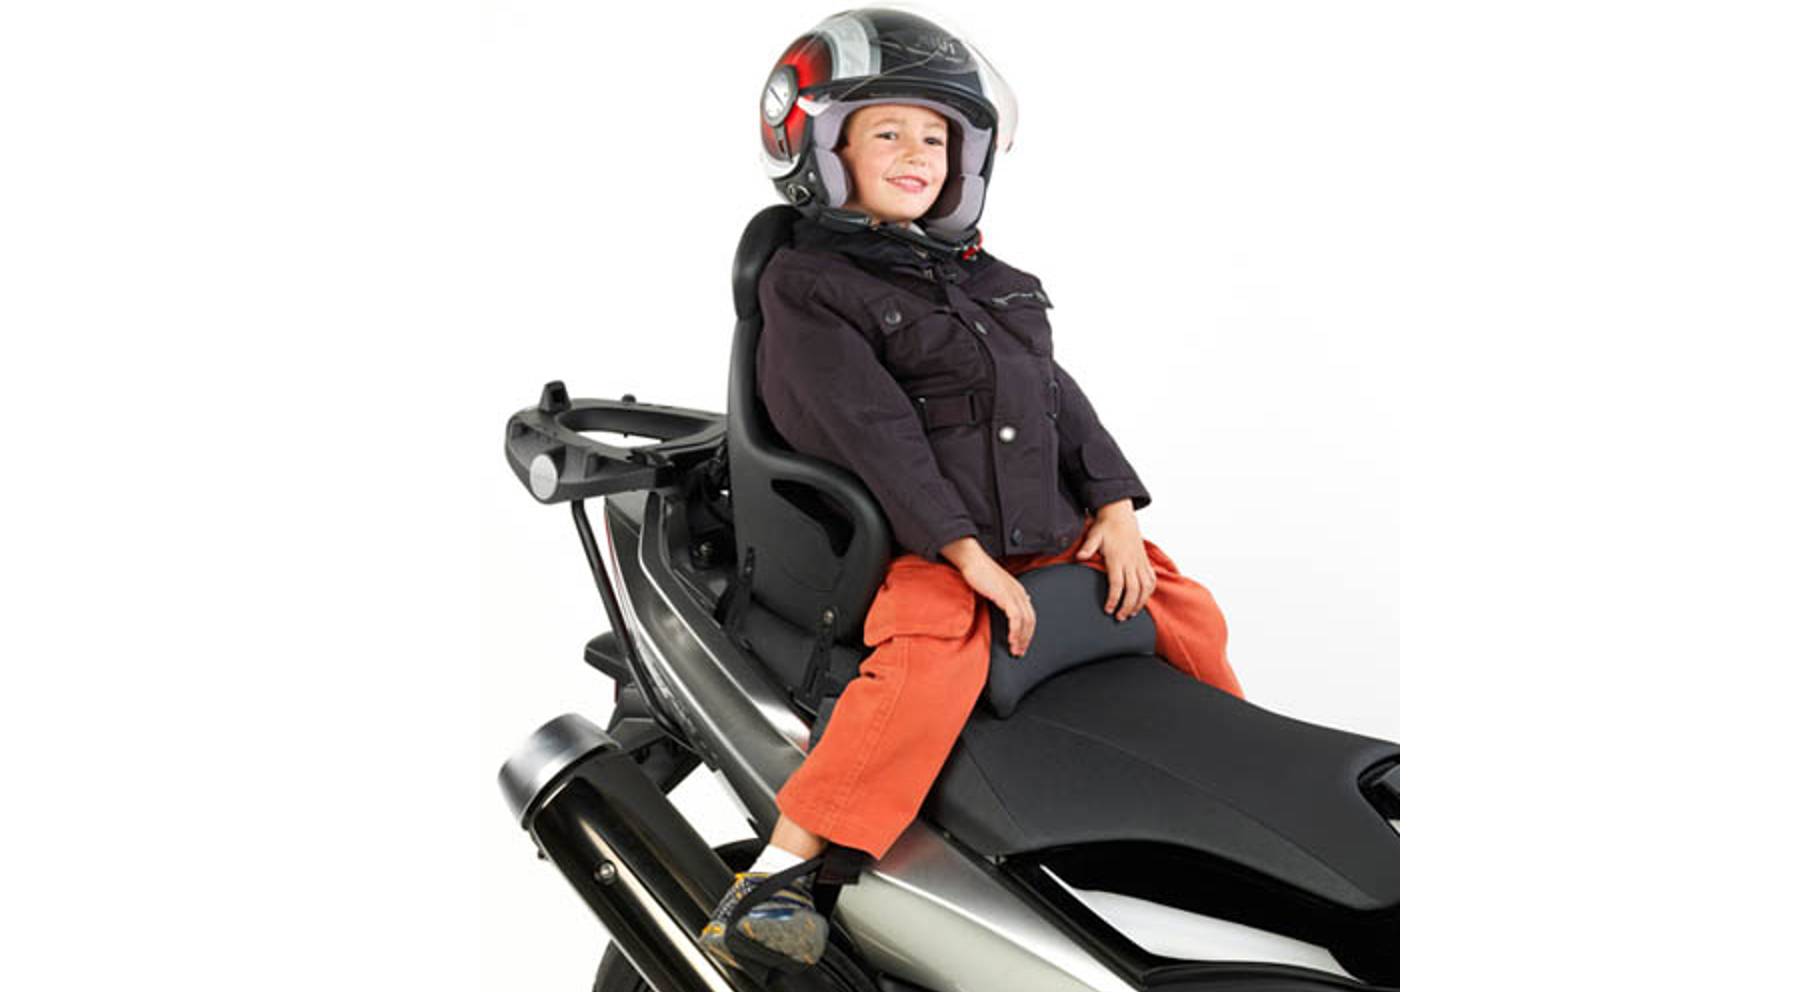 What is the minimum age to take a child on a motorcycle?